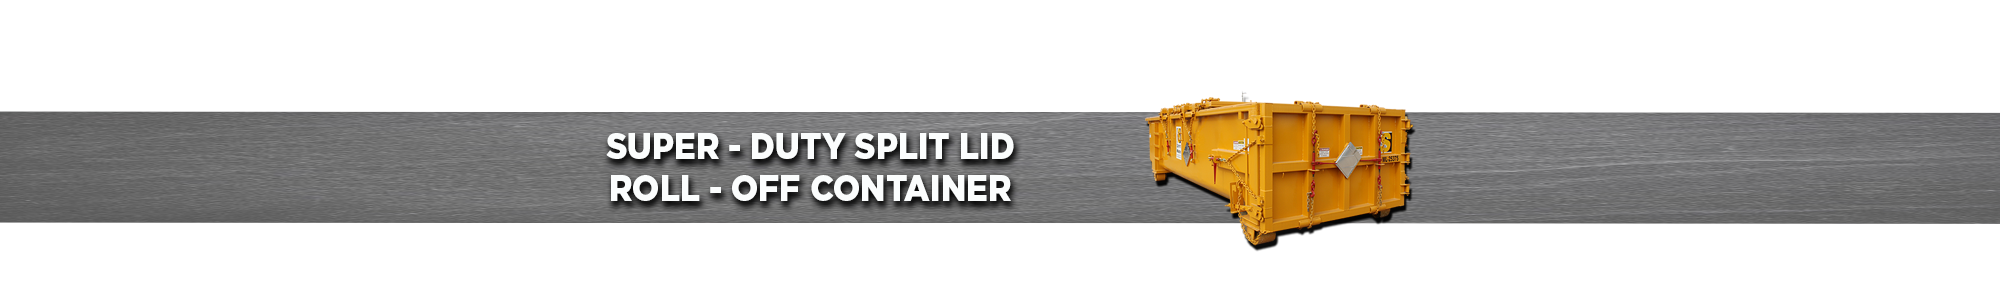 Super-Duty Split Lid Roll-Off Container